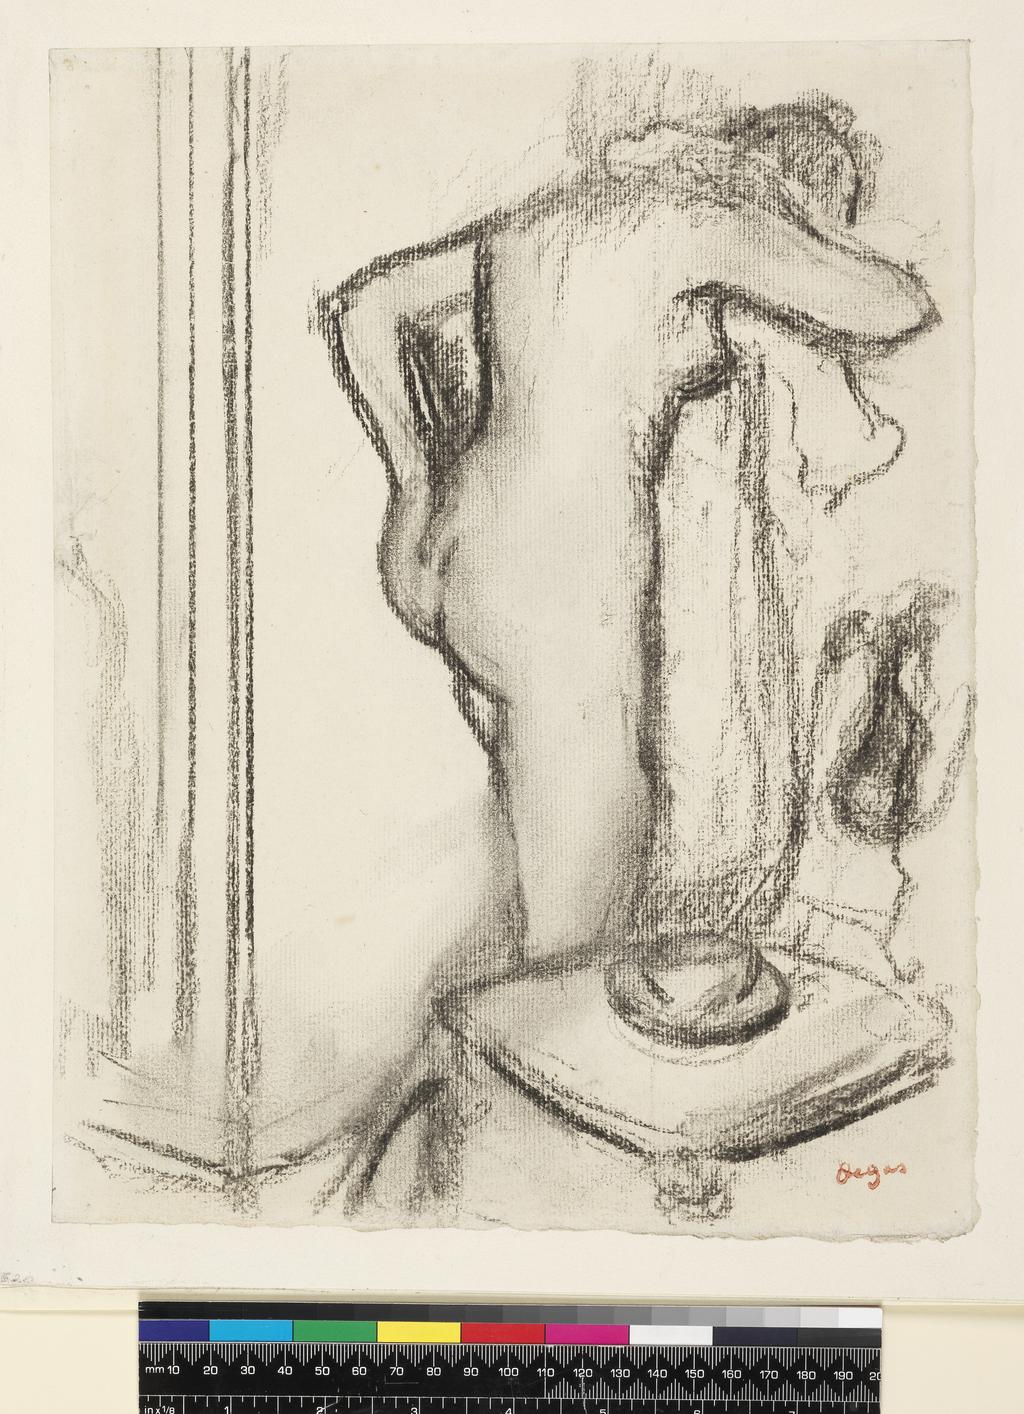 An image of Femme à sa toilette. Degas, Edgar (French, 1834-1917). Charcoal on paper, height 318 mm, width 248 mm, 1890.